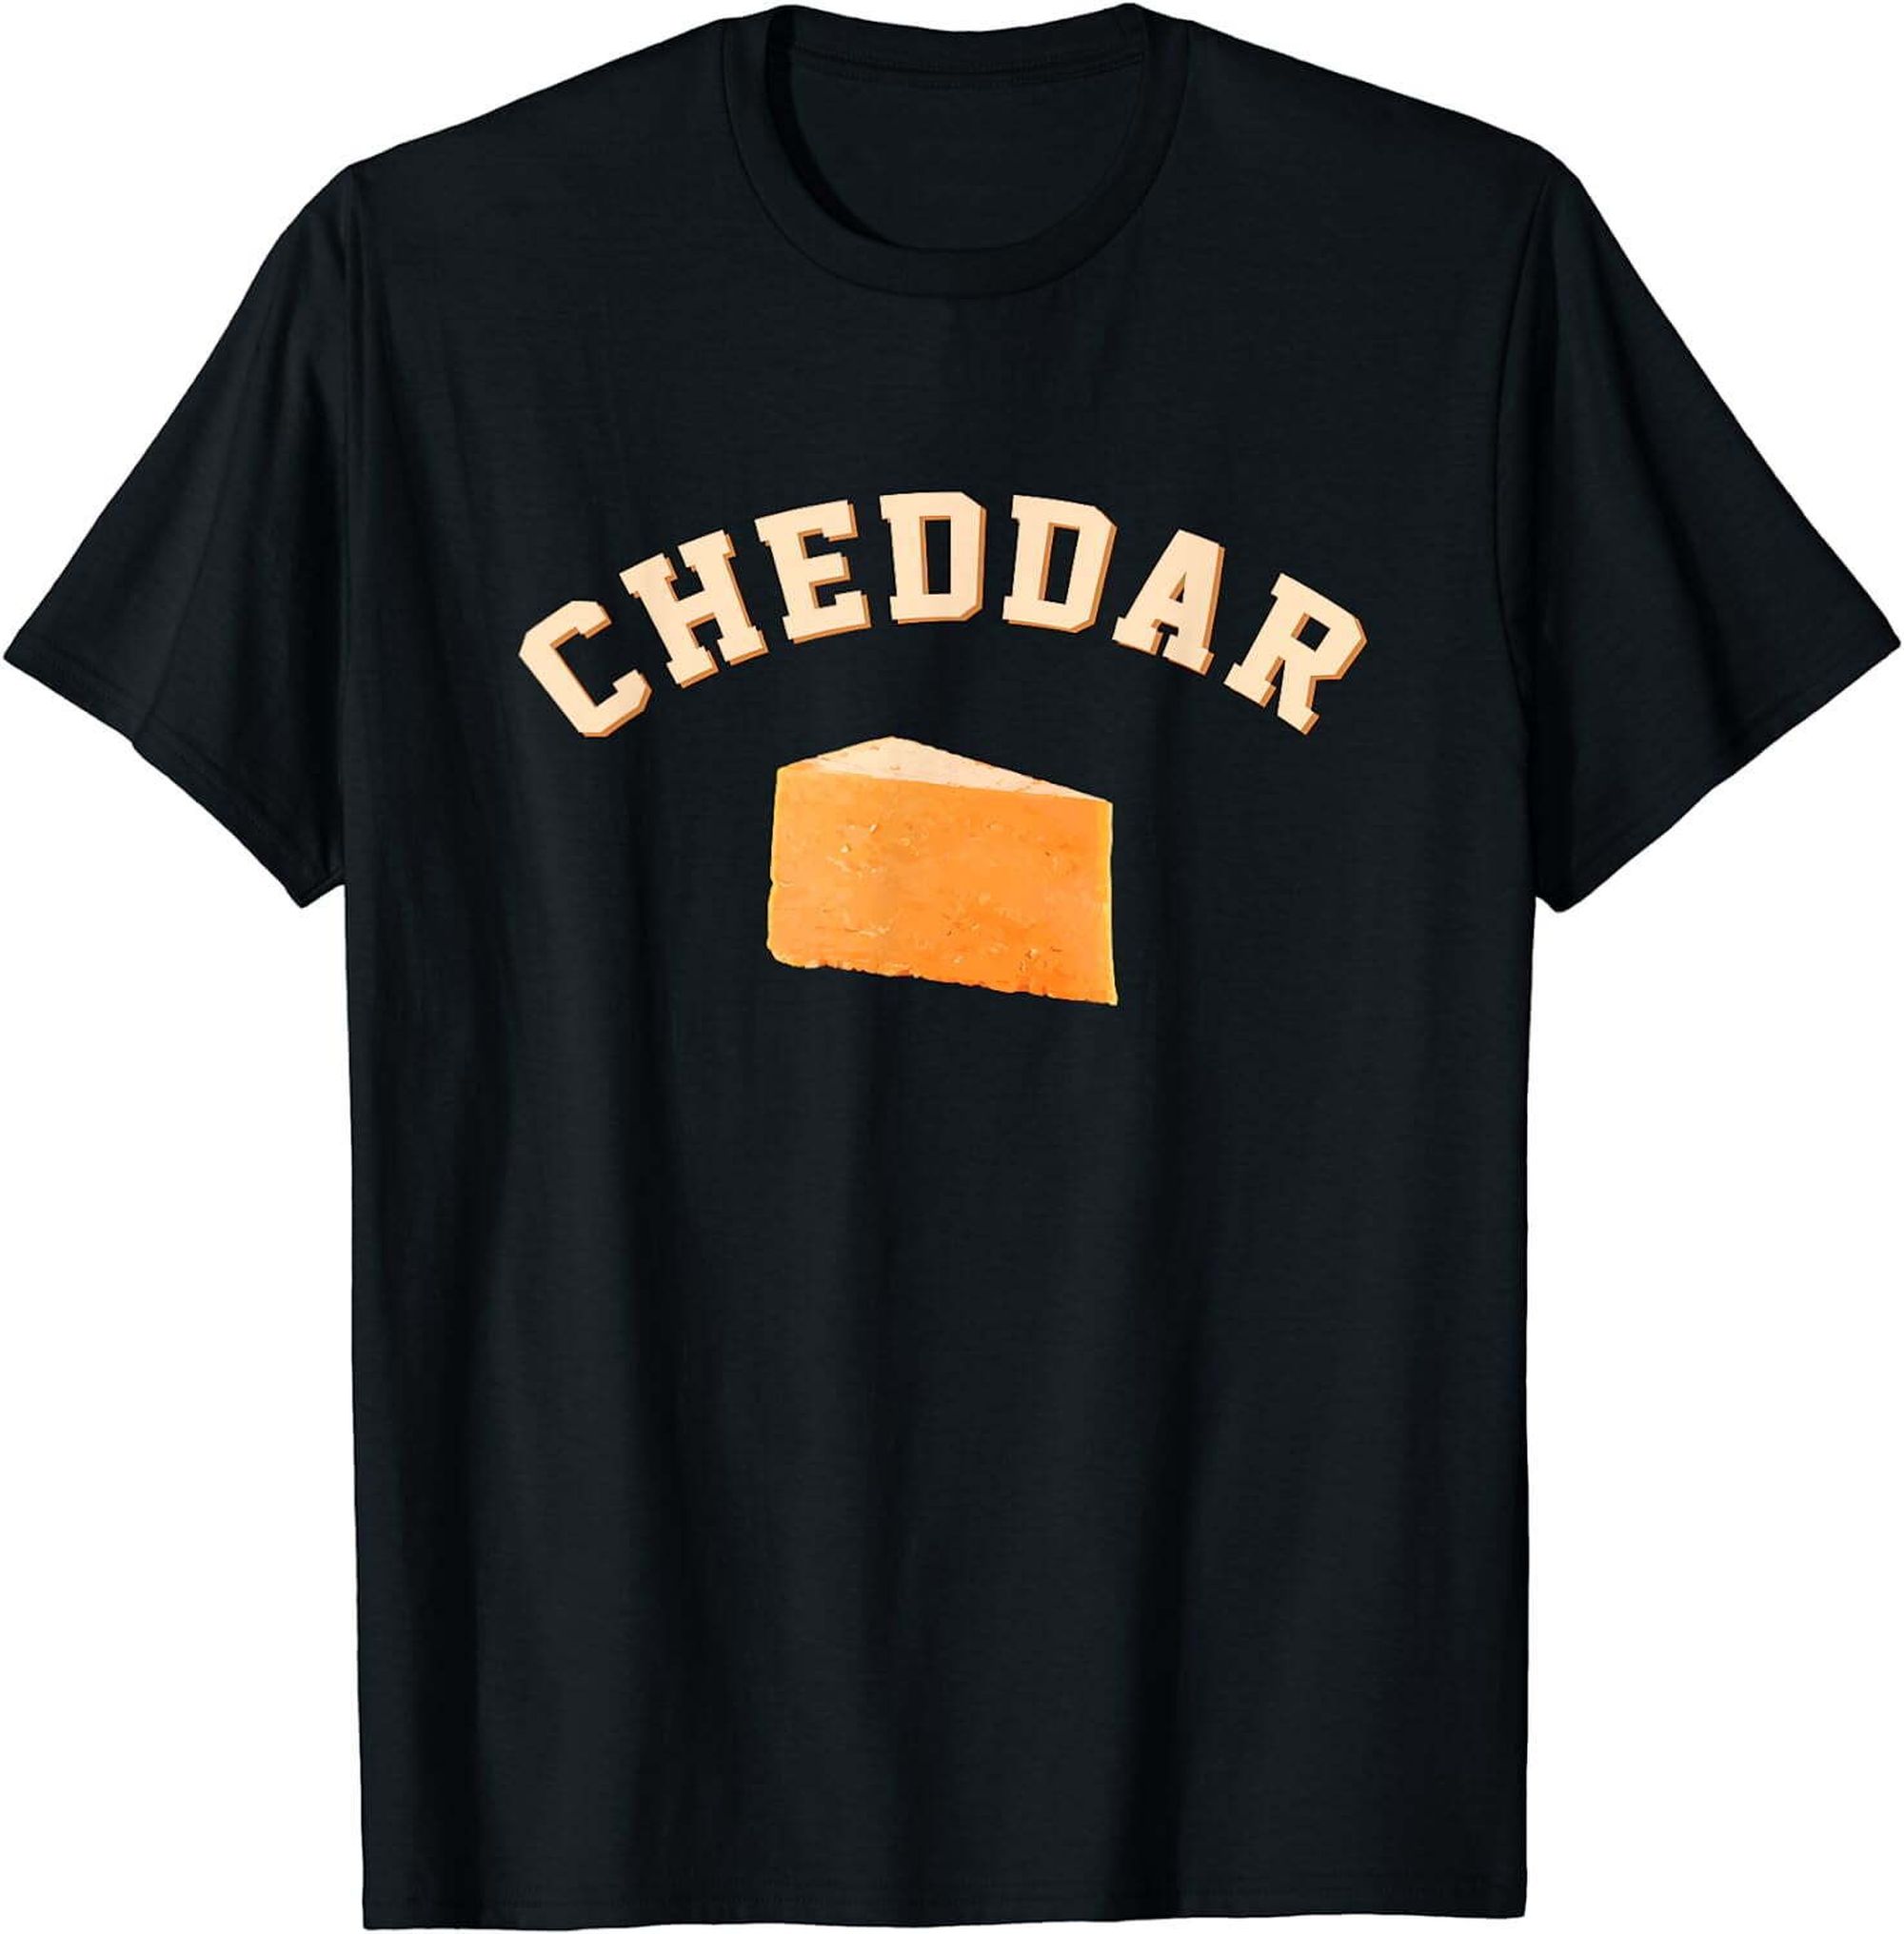 Funny Cheddar Cheese Mascot Shirt: Cheesy College Tee with English ...